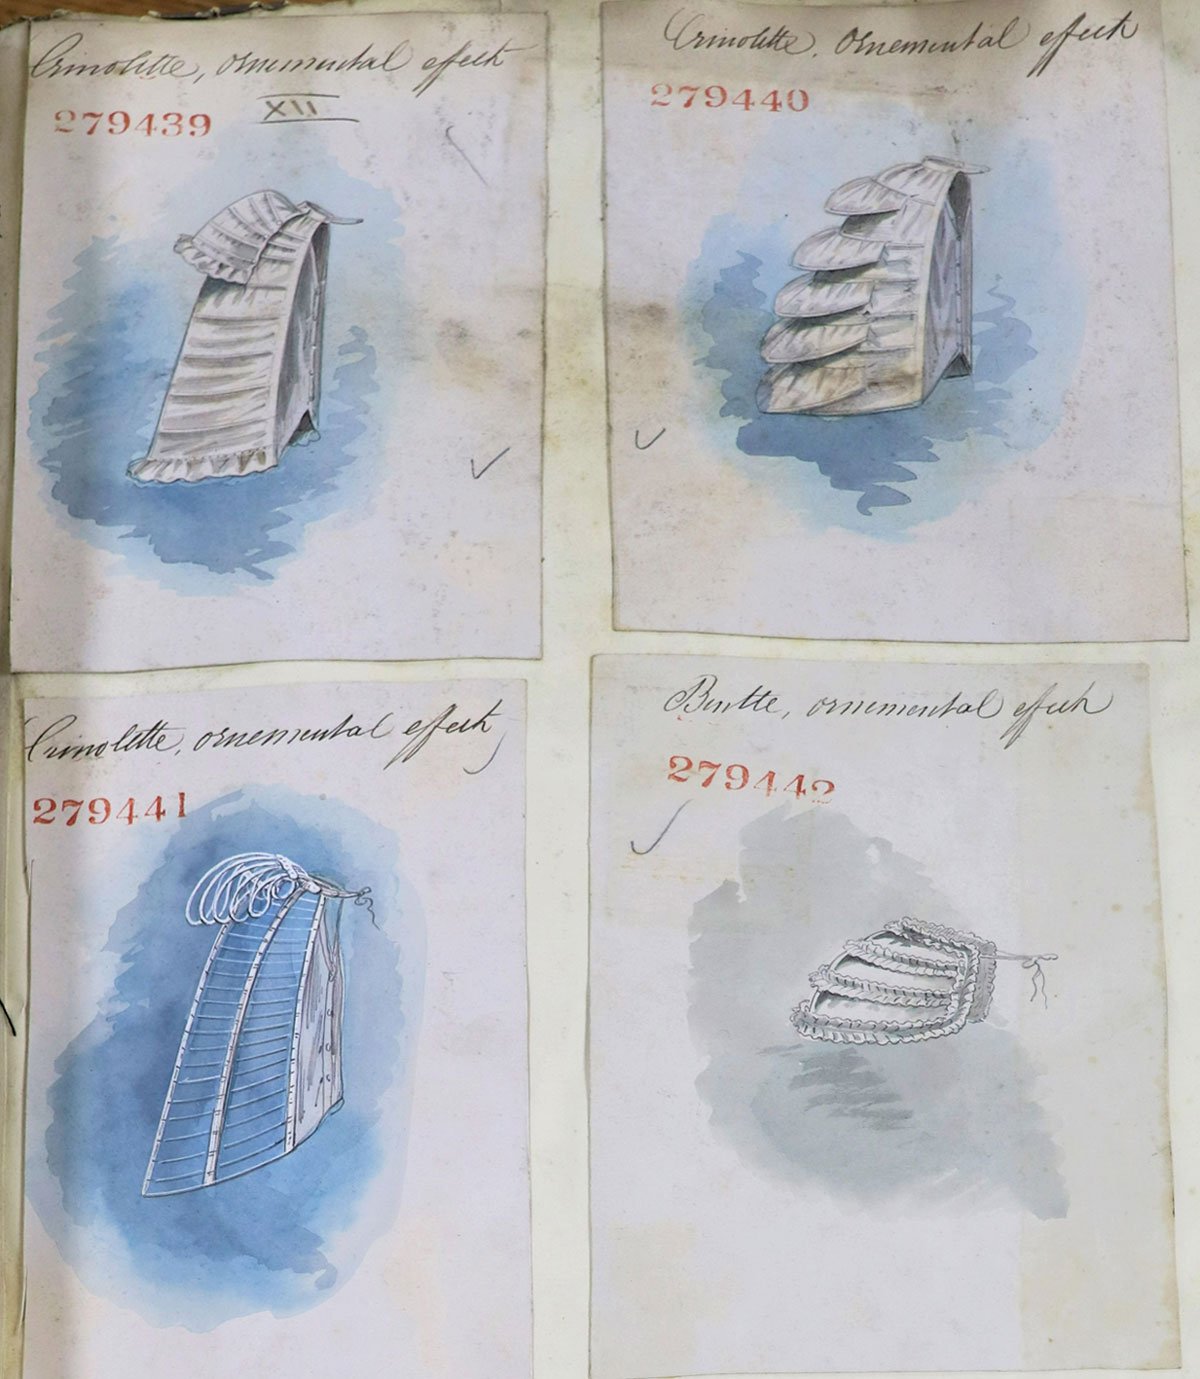 Four drawings of registered designs of women's clothing.